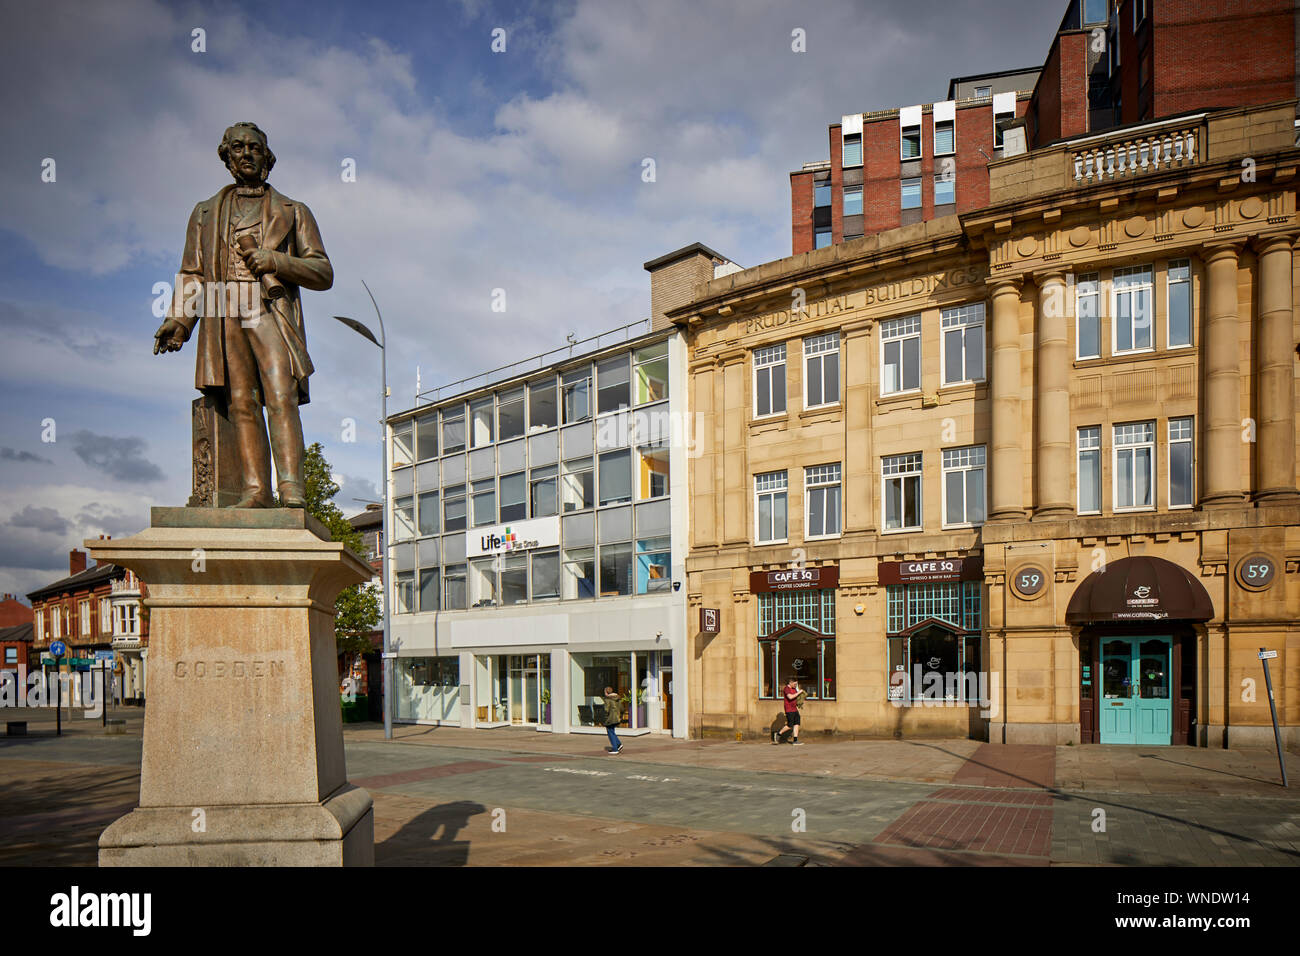 Richard Cobden statue Stockport Liberal statesman, associated with free trade campaigns, Anti-Corn Law League and Cobden–Chevalier Treaty. Stock Photo